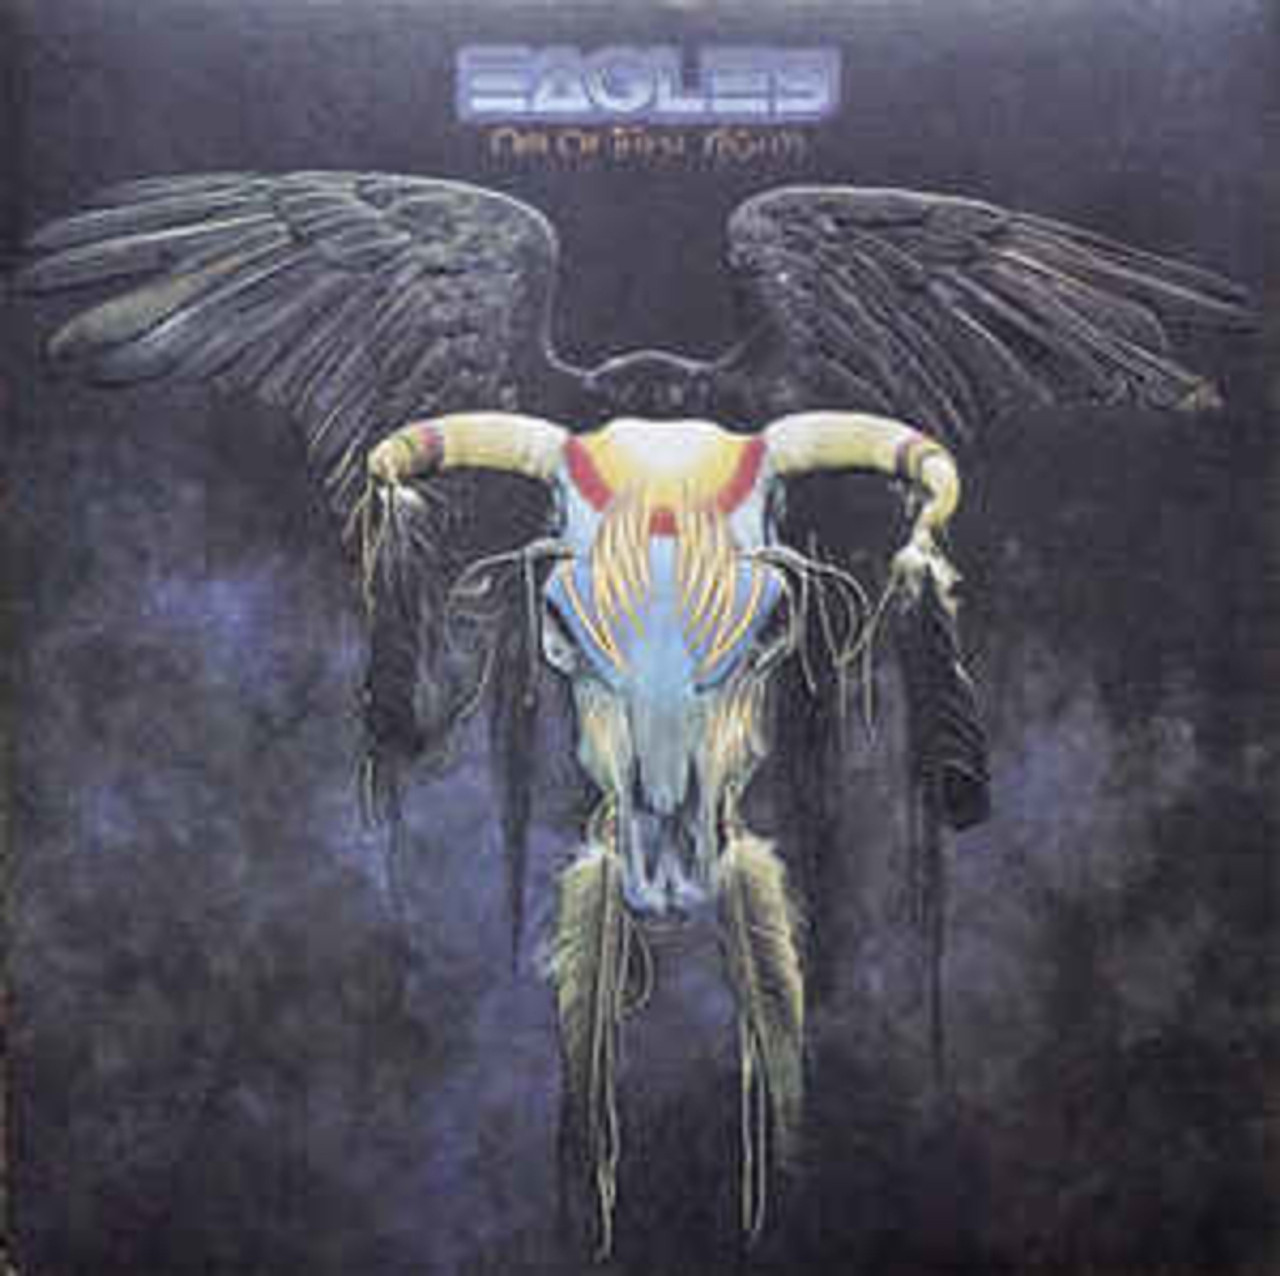 The eagles one of these nights registry baby walmart